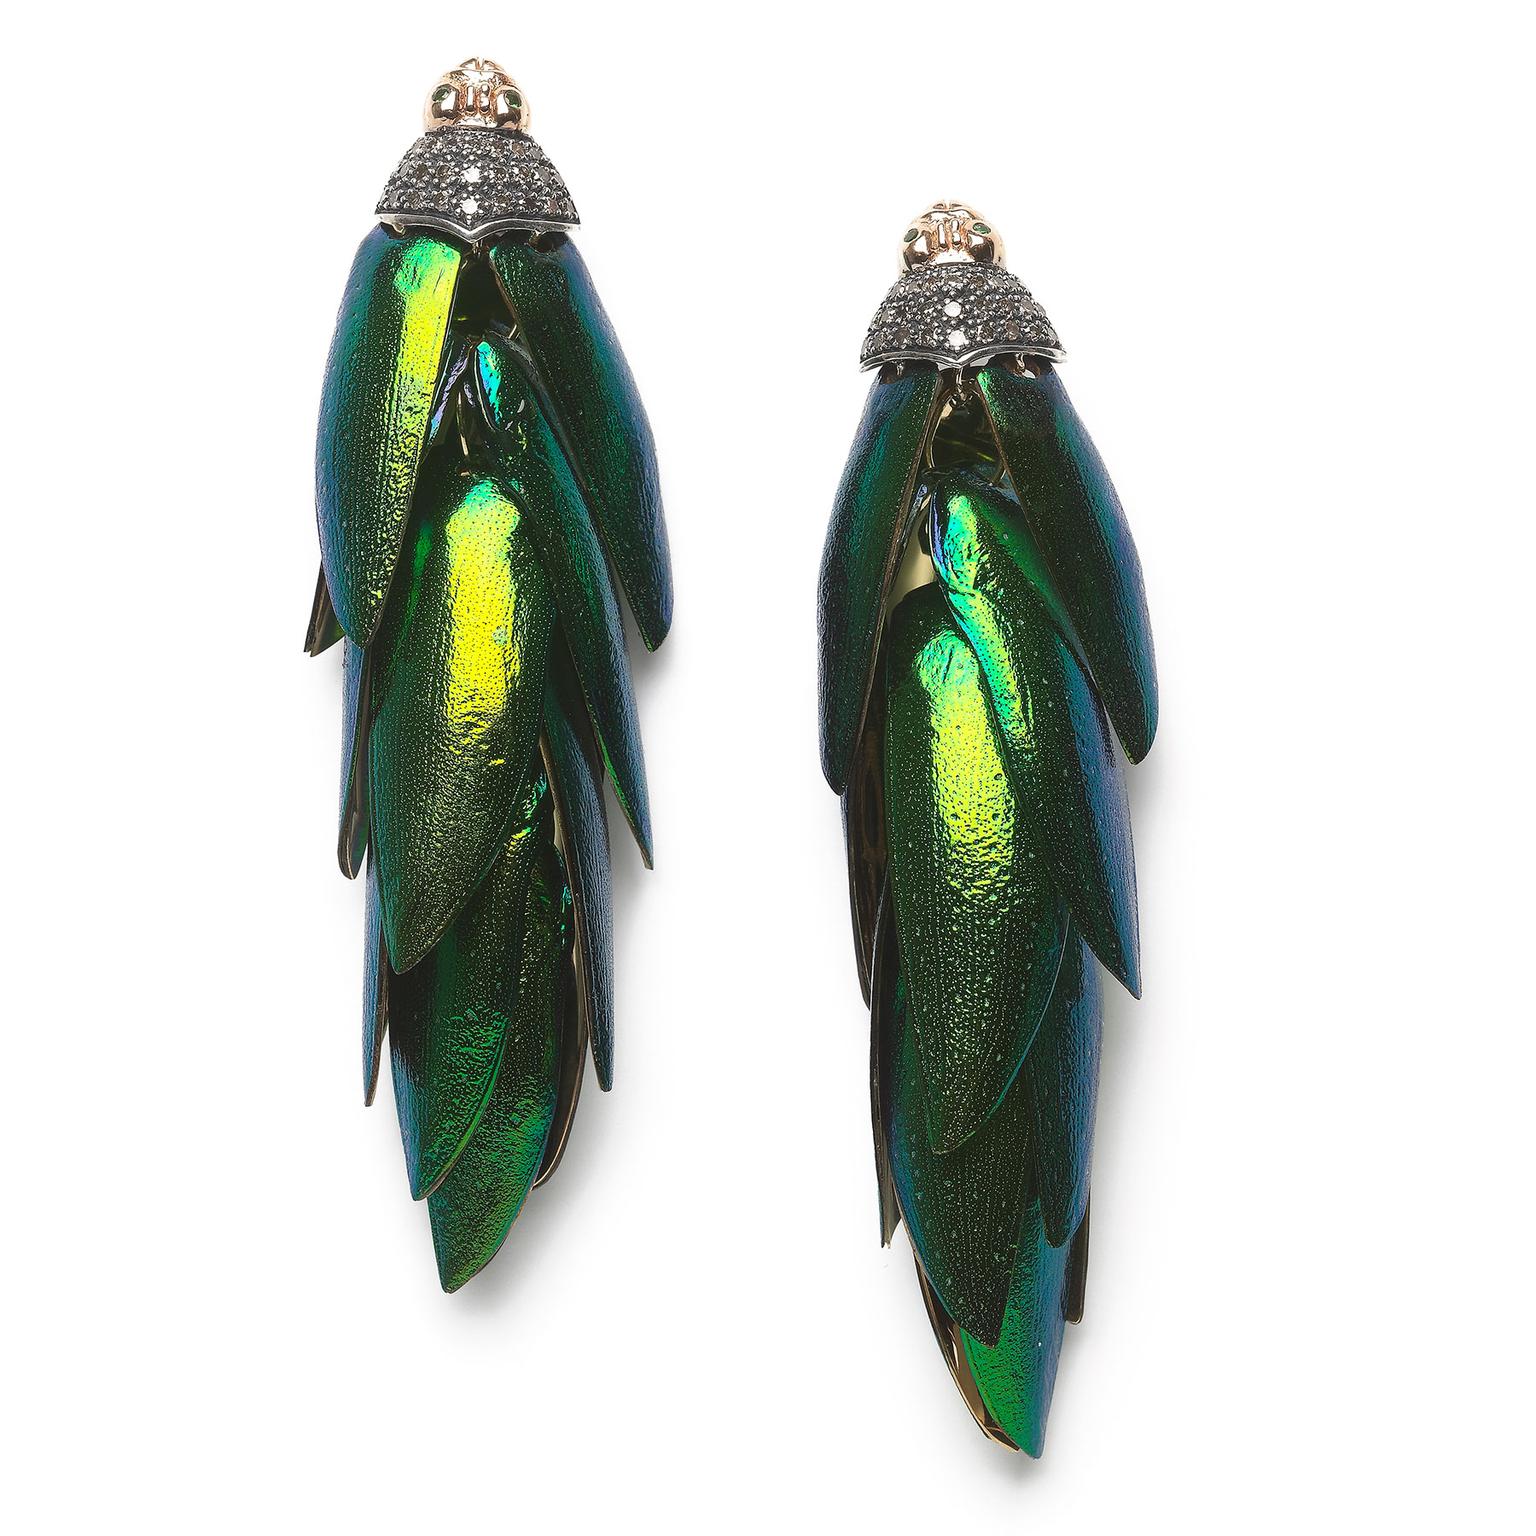 Bibi van der Velden Scarab bunch earrings in gold featuring authentic, ethically sourced beetle wings (£5,055).